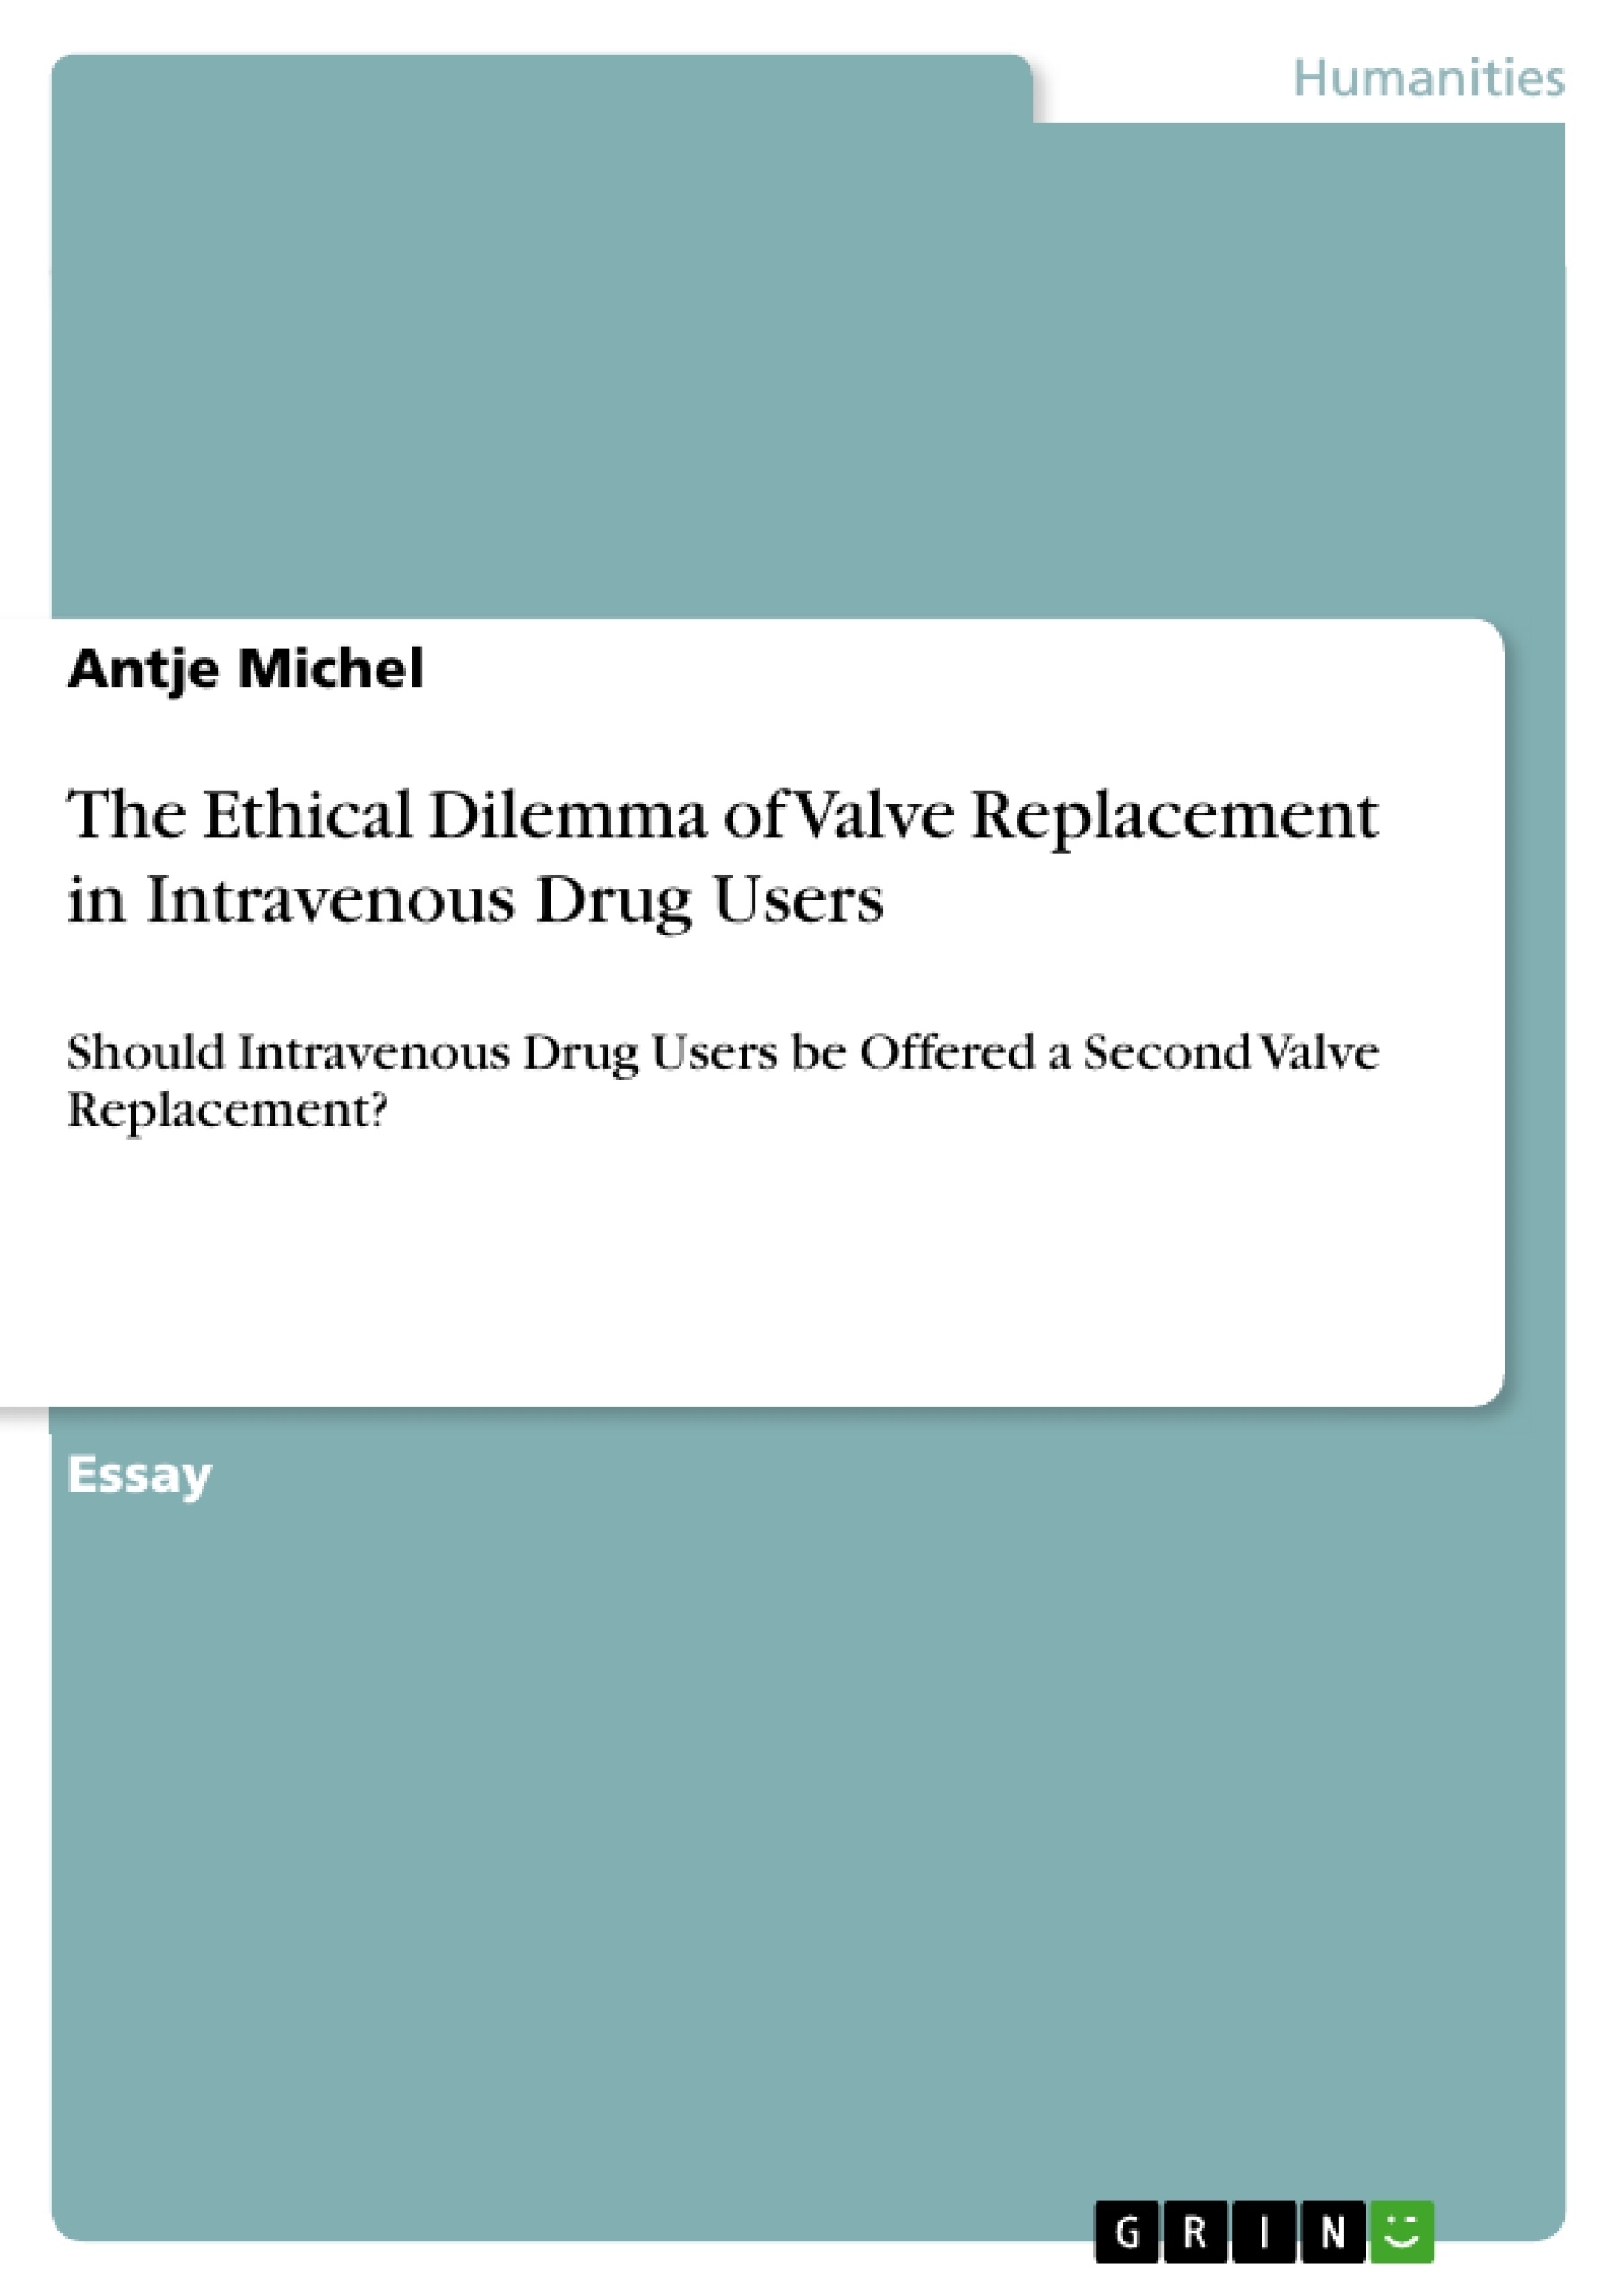 Titre: The Ethical Dilemma of Valve Replacement in Intravenous Drug Users